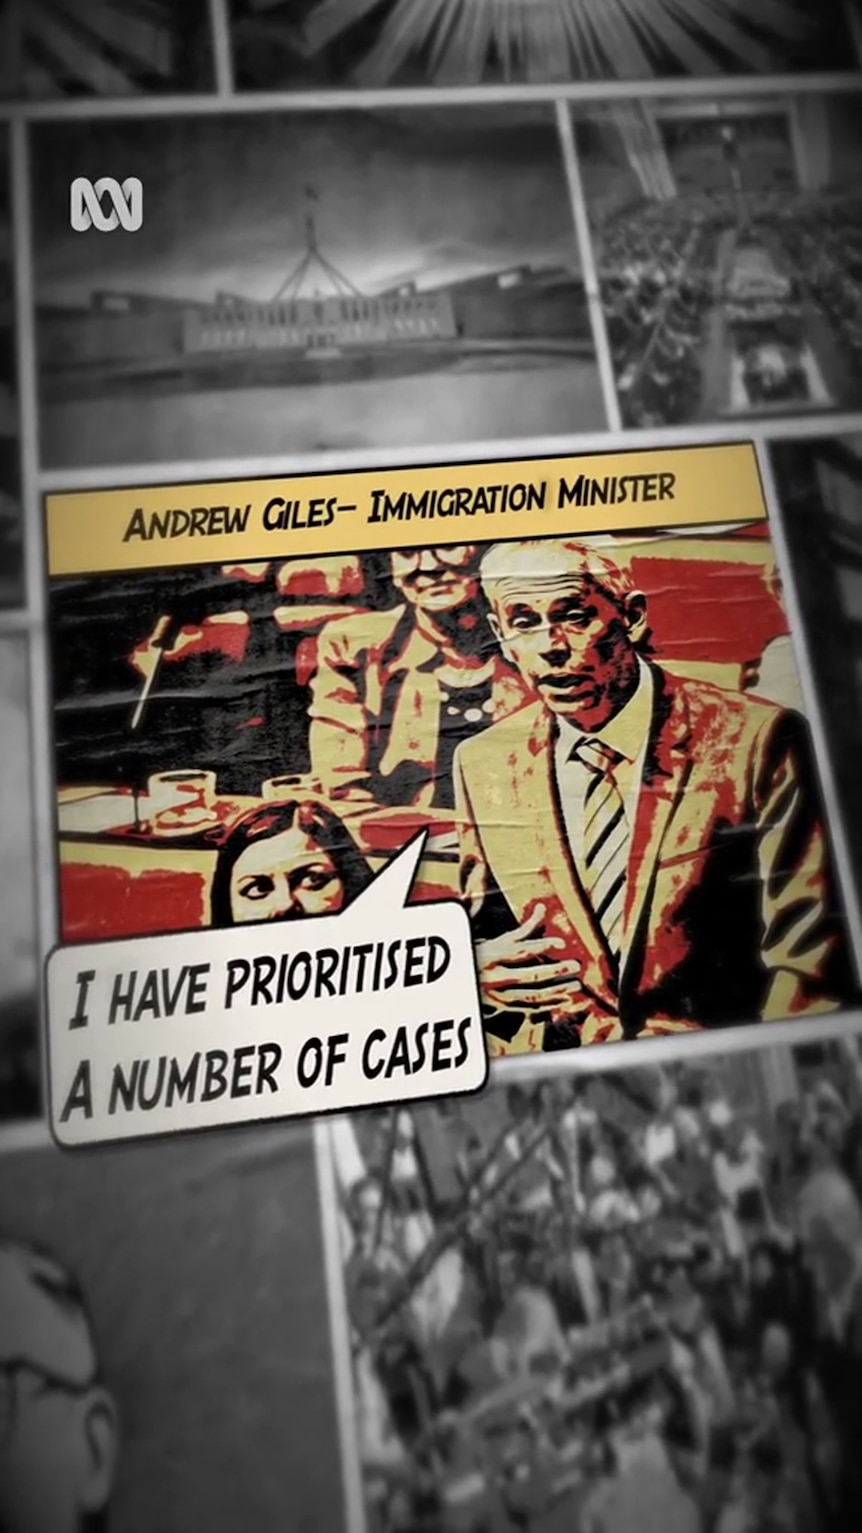 Image in comic book style shows man in suit saying, "I have prioritised a number of cases"